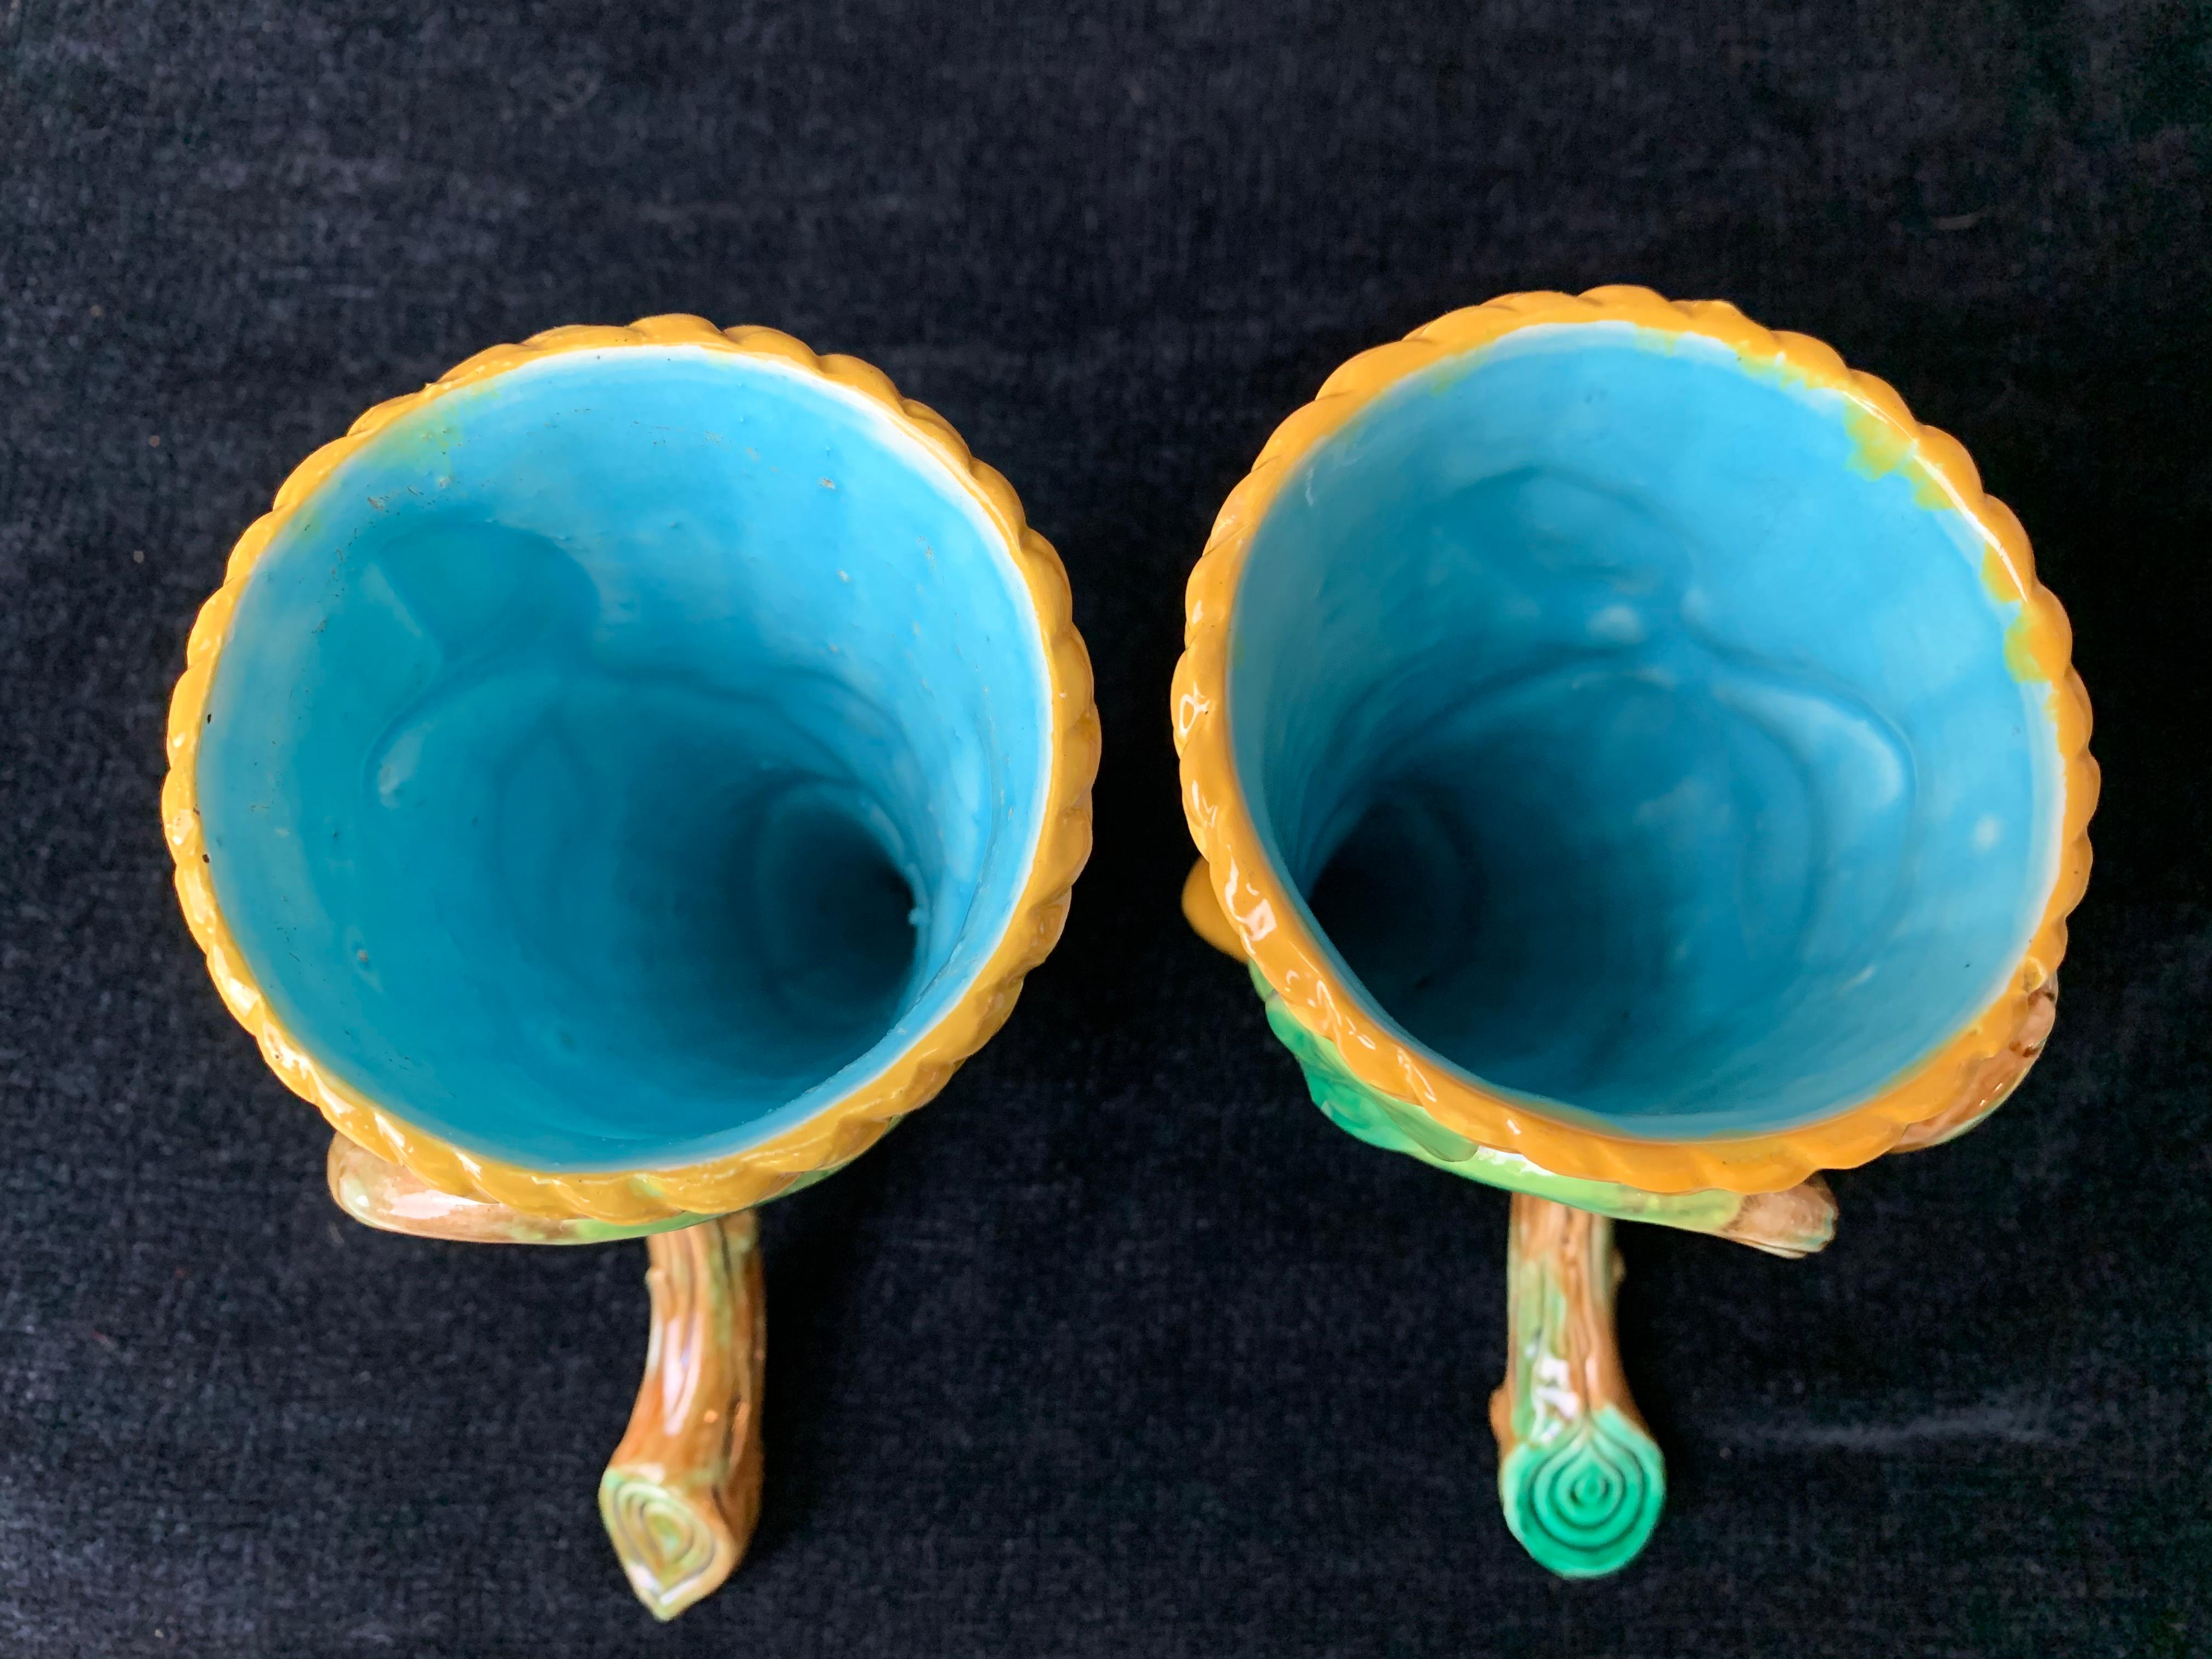 Pair George Jones Majolica Vases White Wicker, Turquoise Lined, English, 1875 For Sale 2